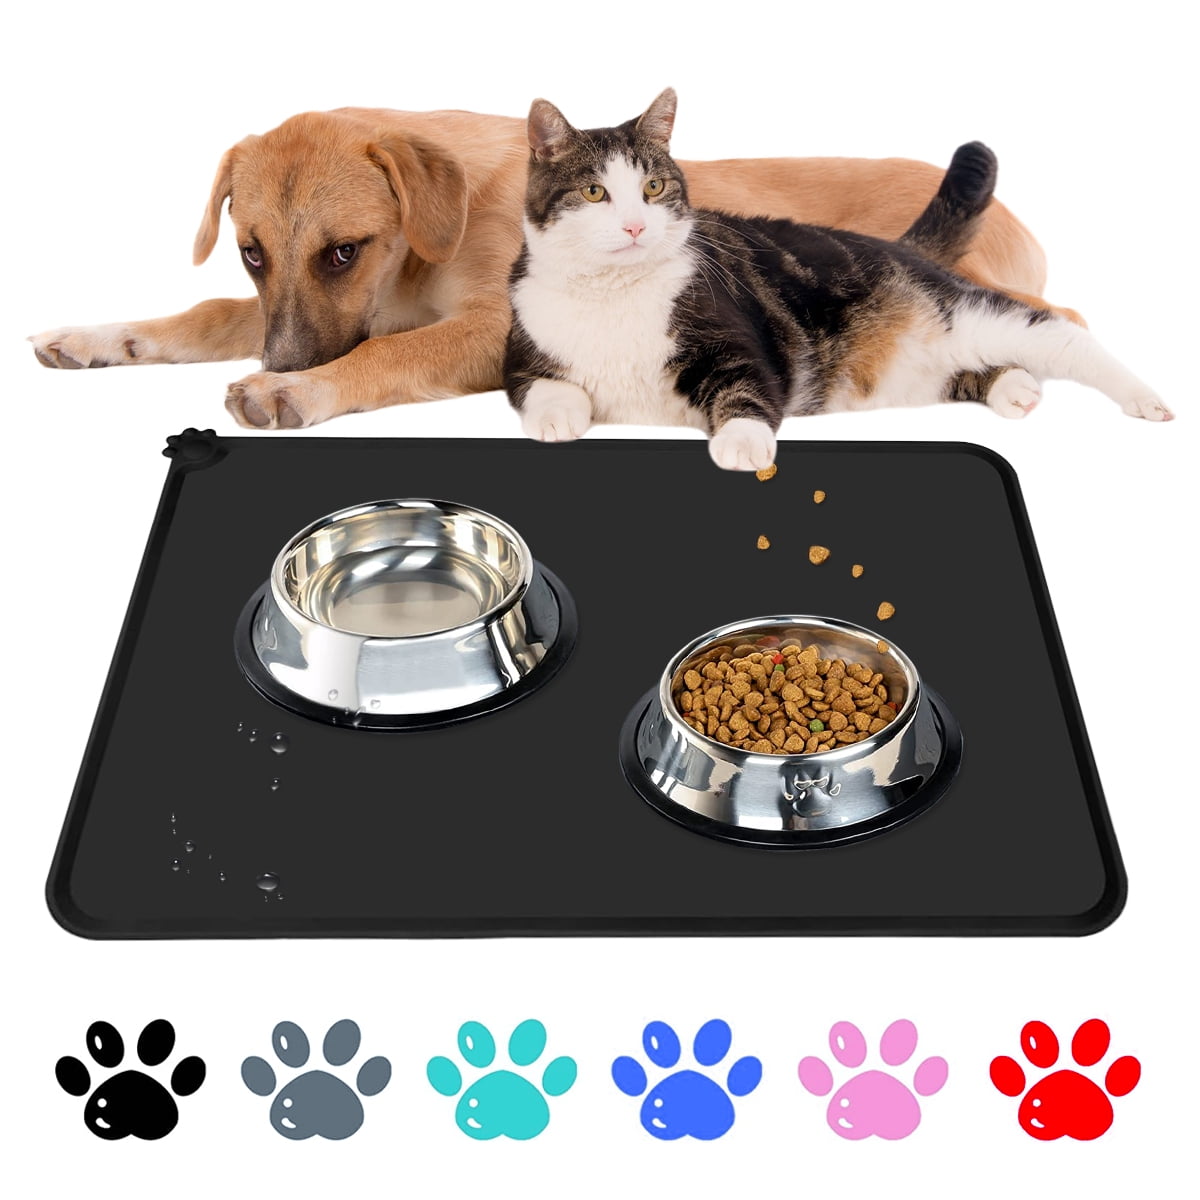 Car Stuff for Women Rubber Mat Mat for Dog Bowl to Feed Dog Food